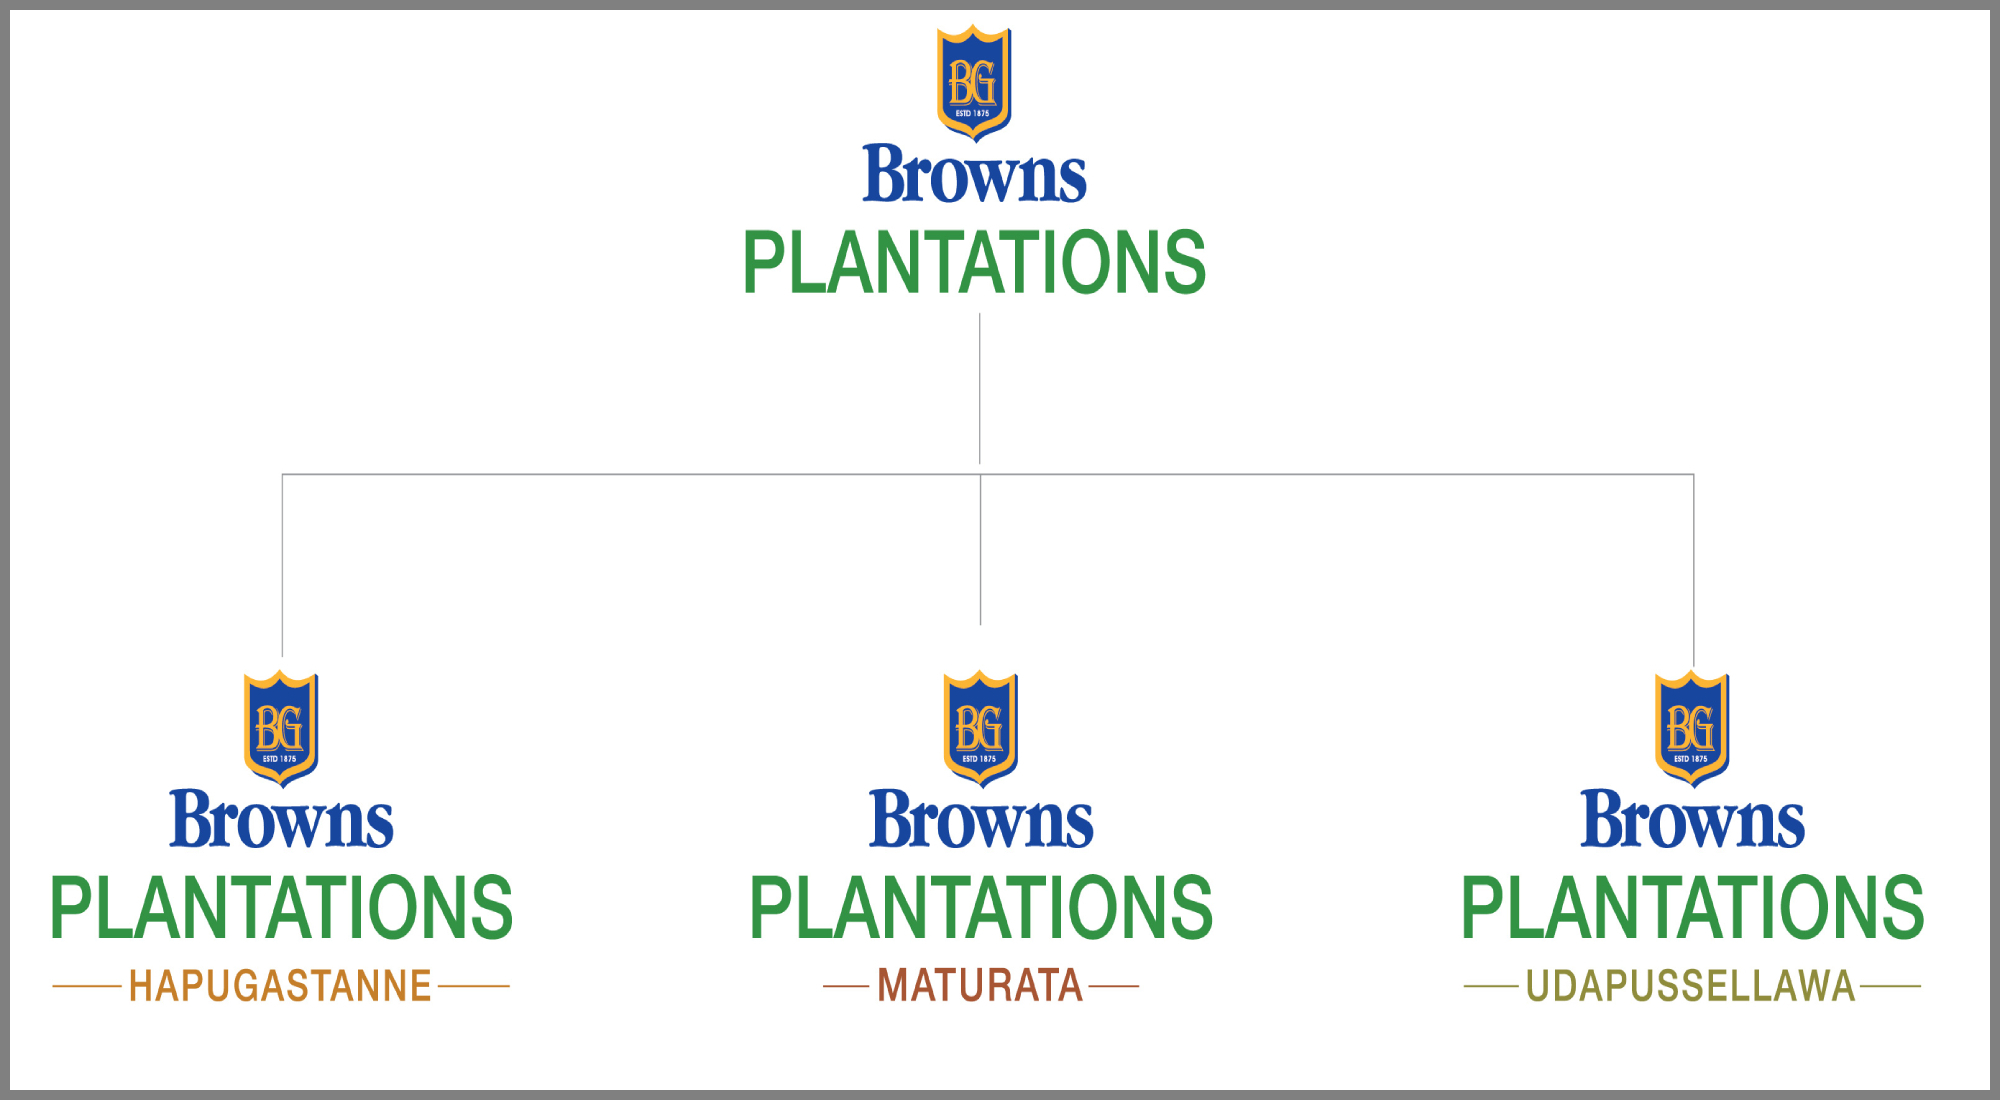 A New Brand Identity for Browns Plantations Sector